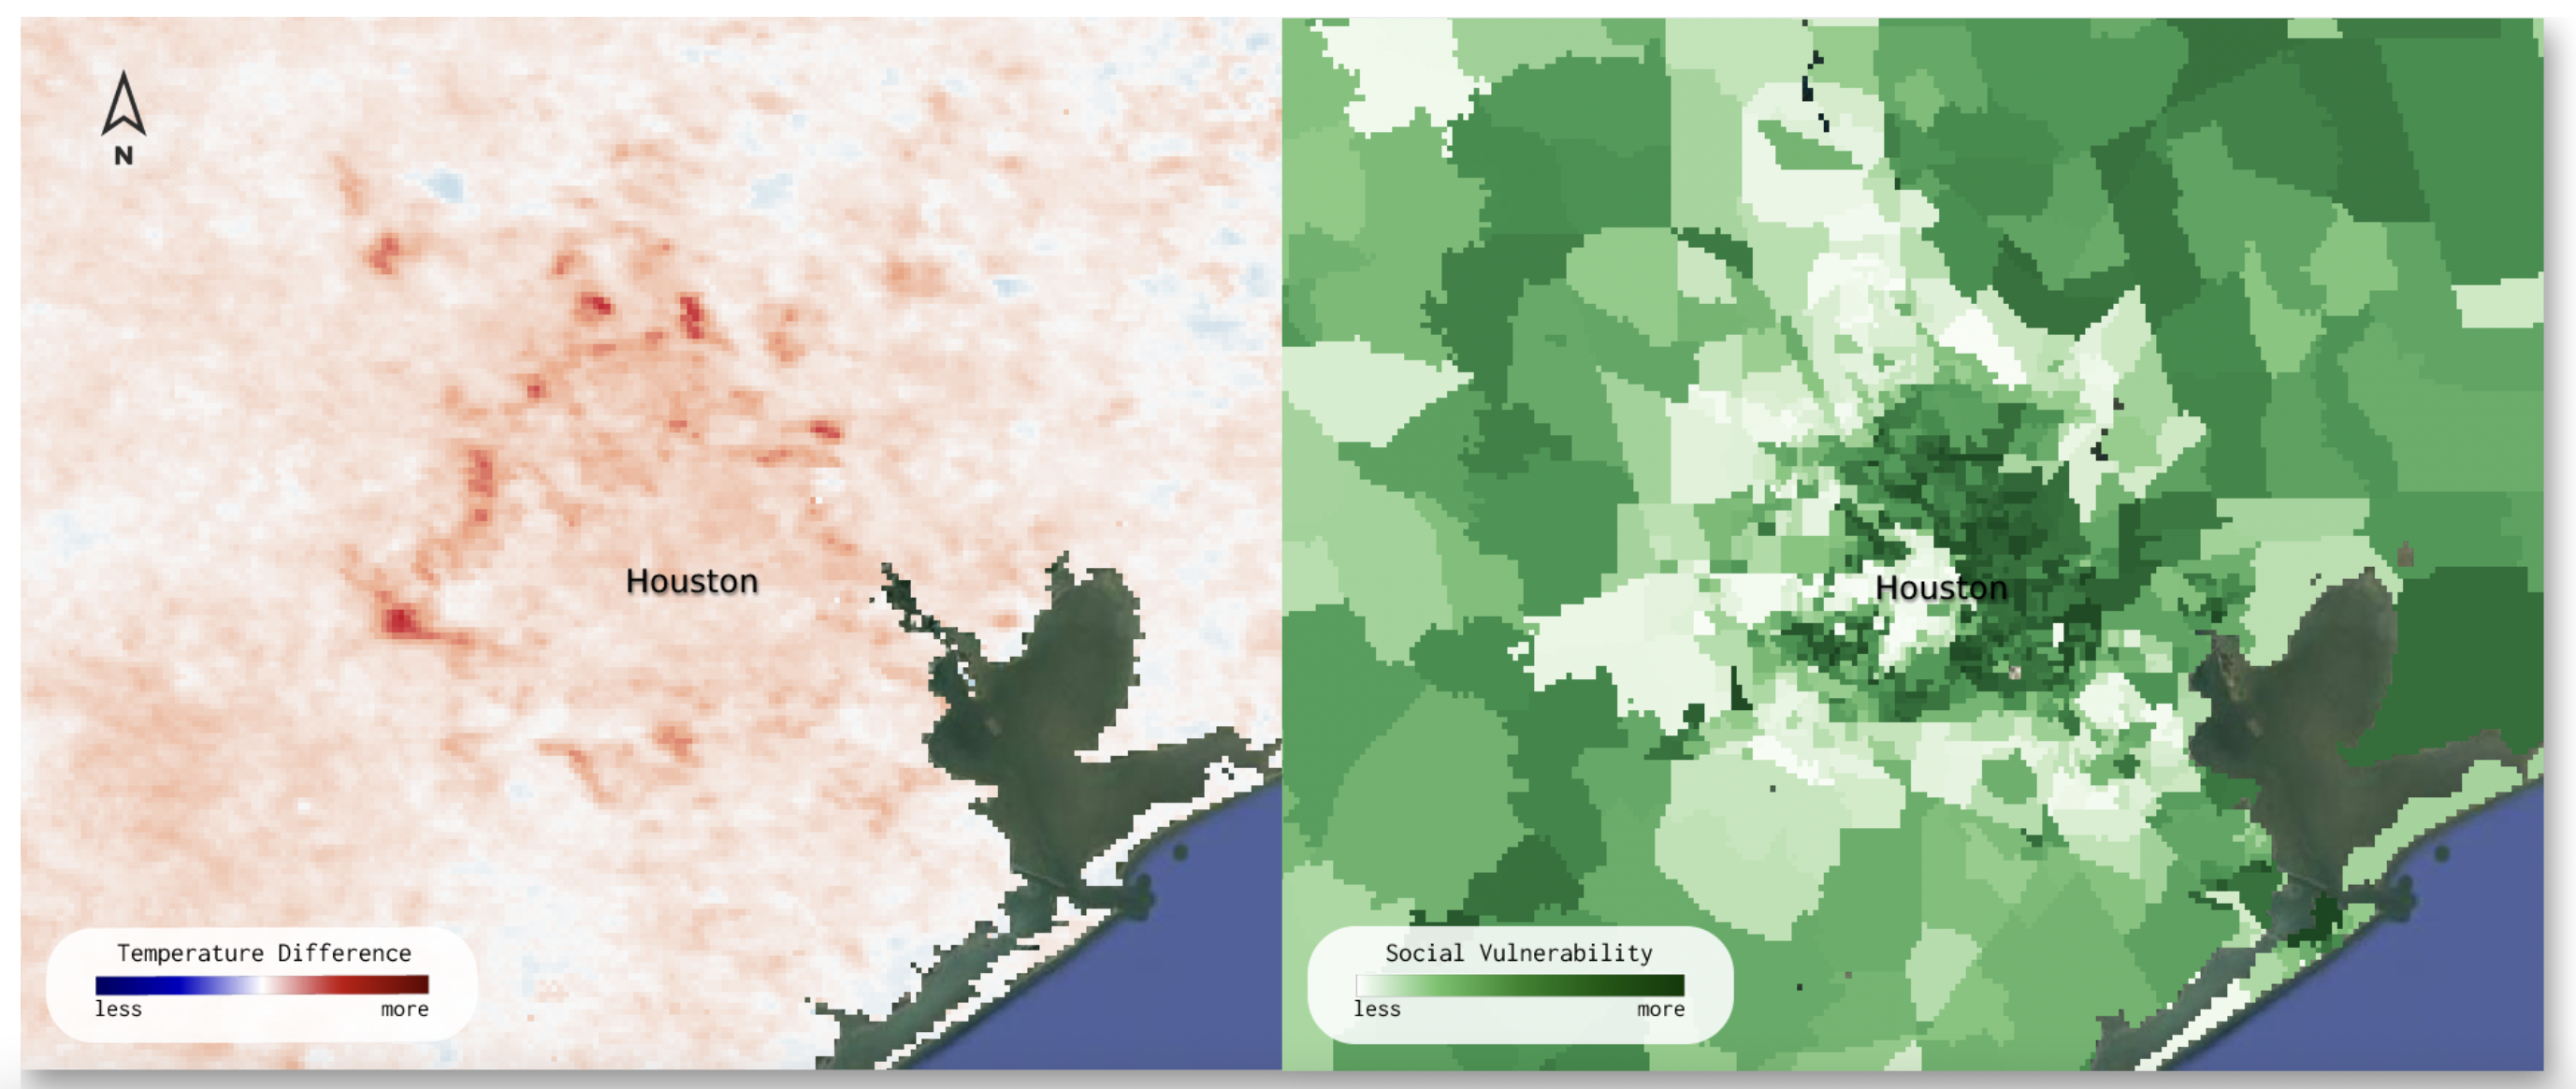 side-by-side images of Houston heat map (left image) with areas of higher heat in red/orange and Houston social vulnerability (right image) with areas of higher social vulnerability in darker shades of green